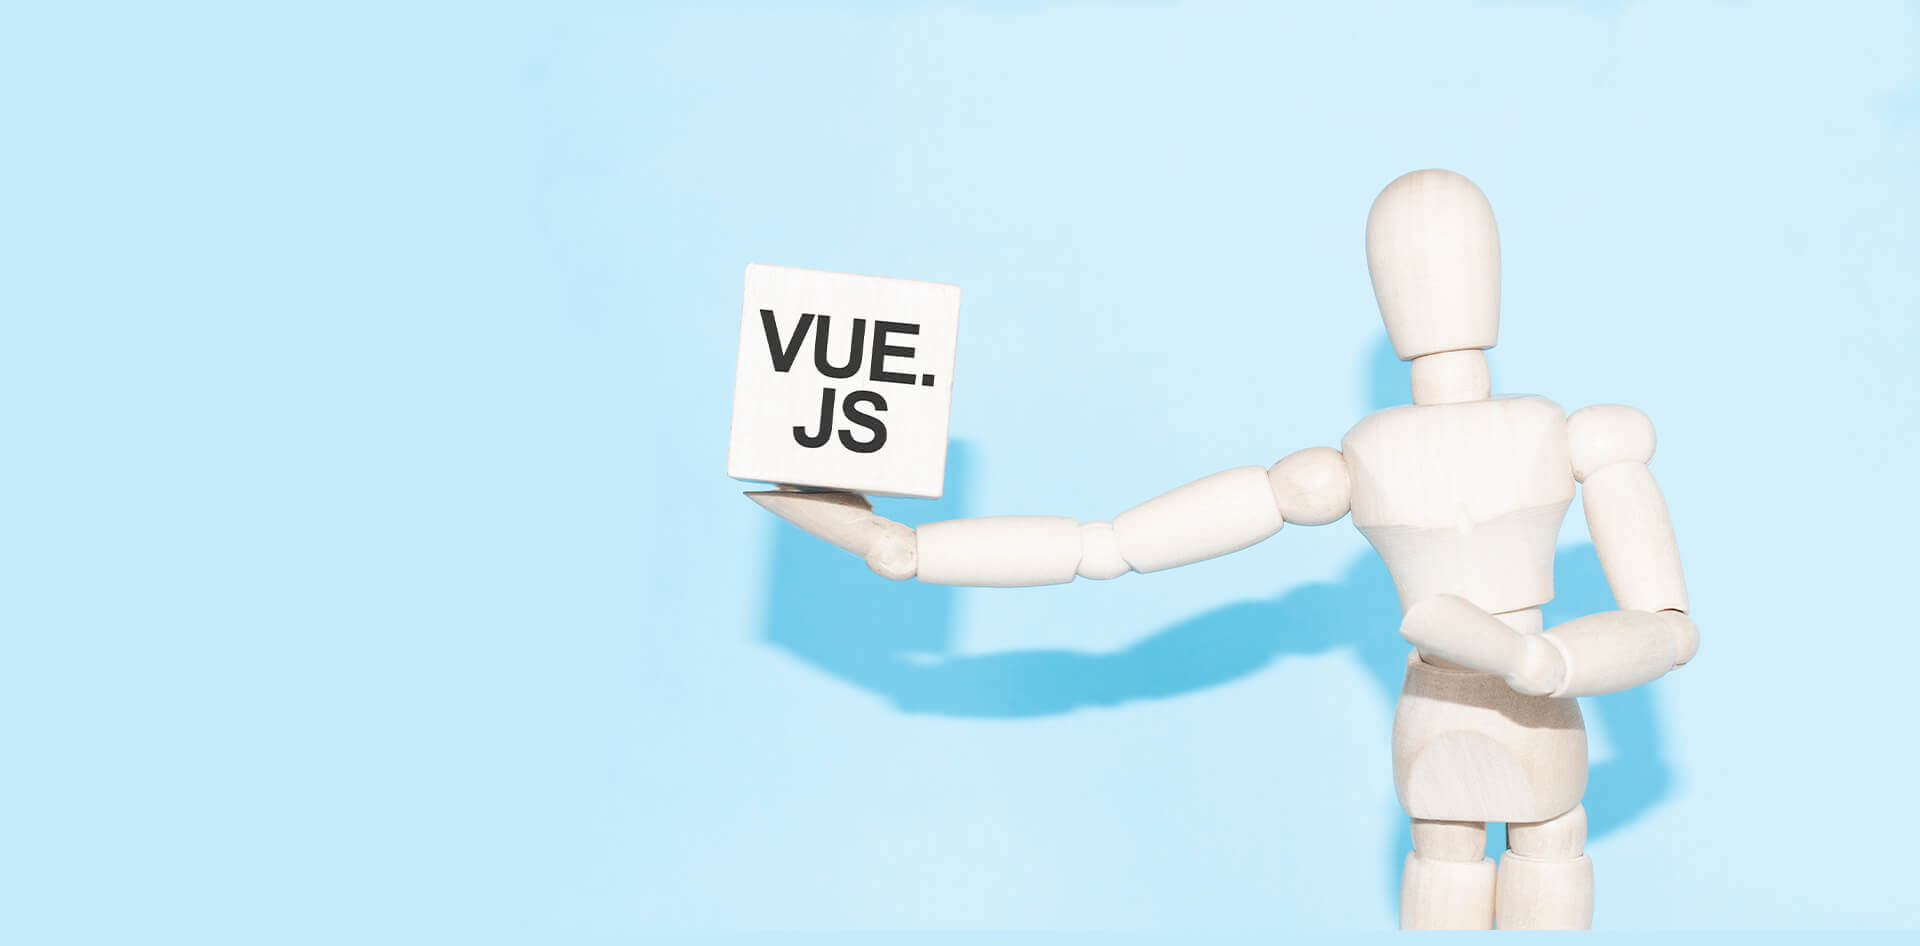 What Does <em>Vue.js Mean</em> for You as the <em>End-user</em>, and Why?